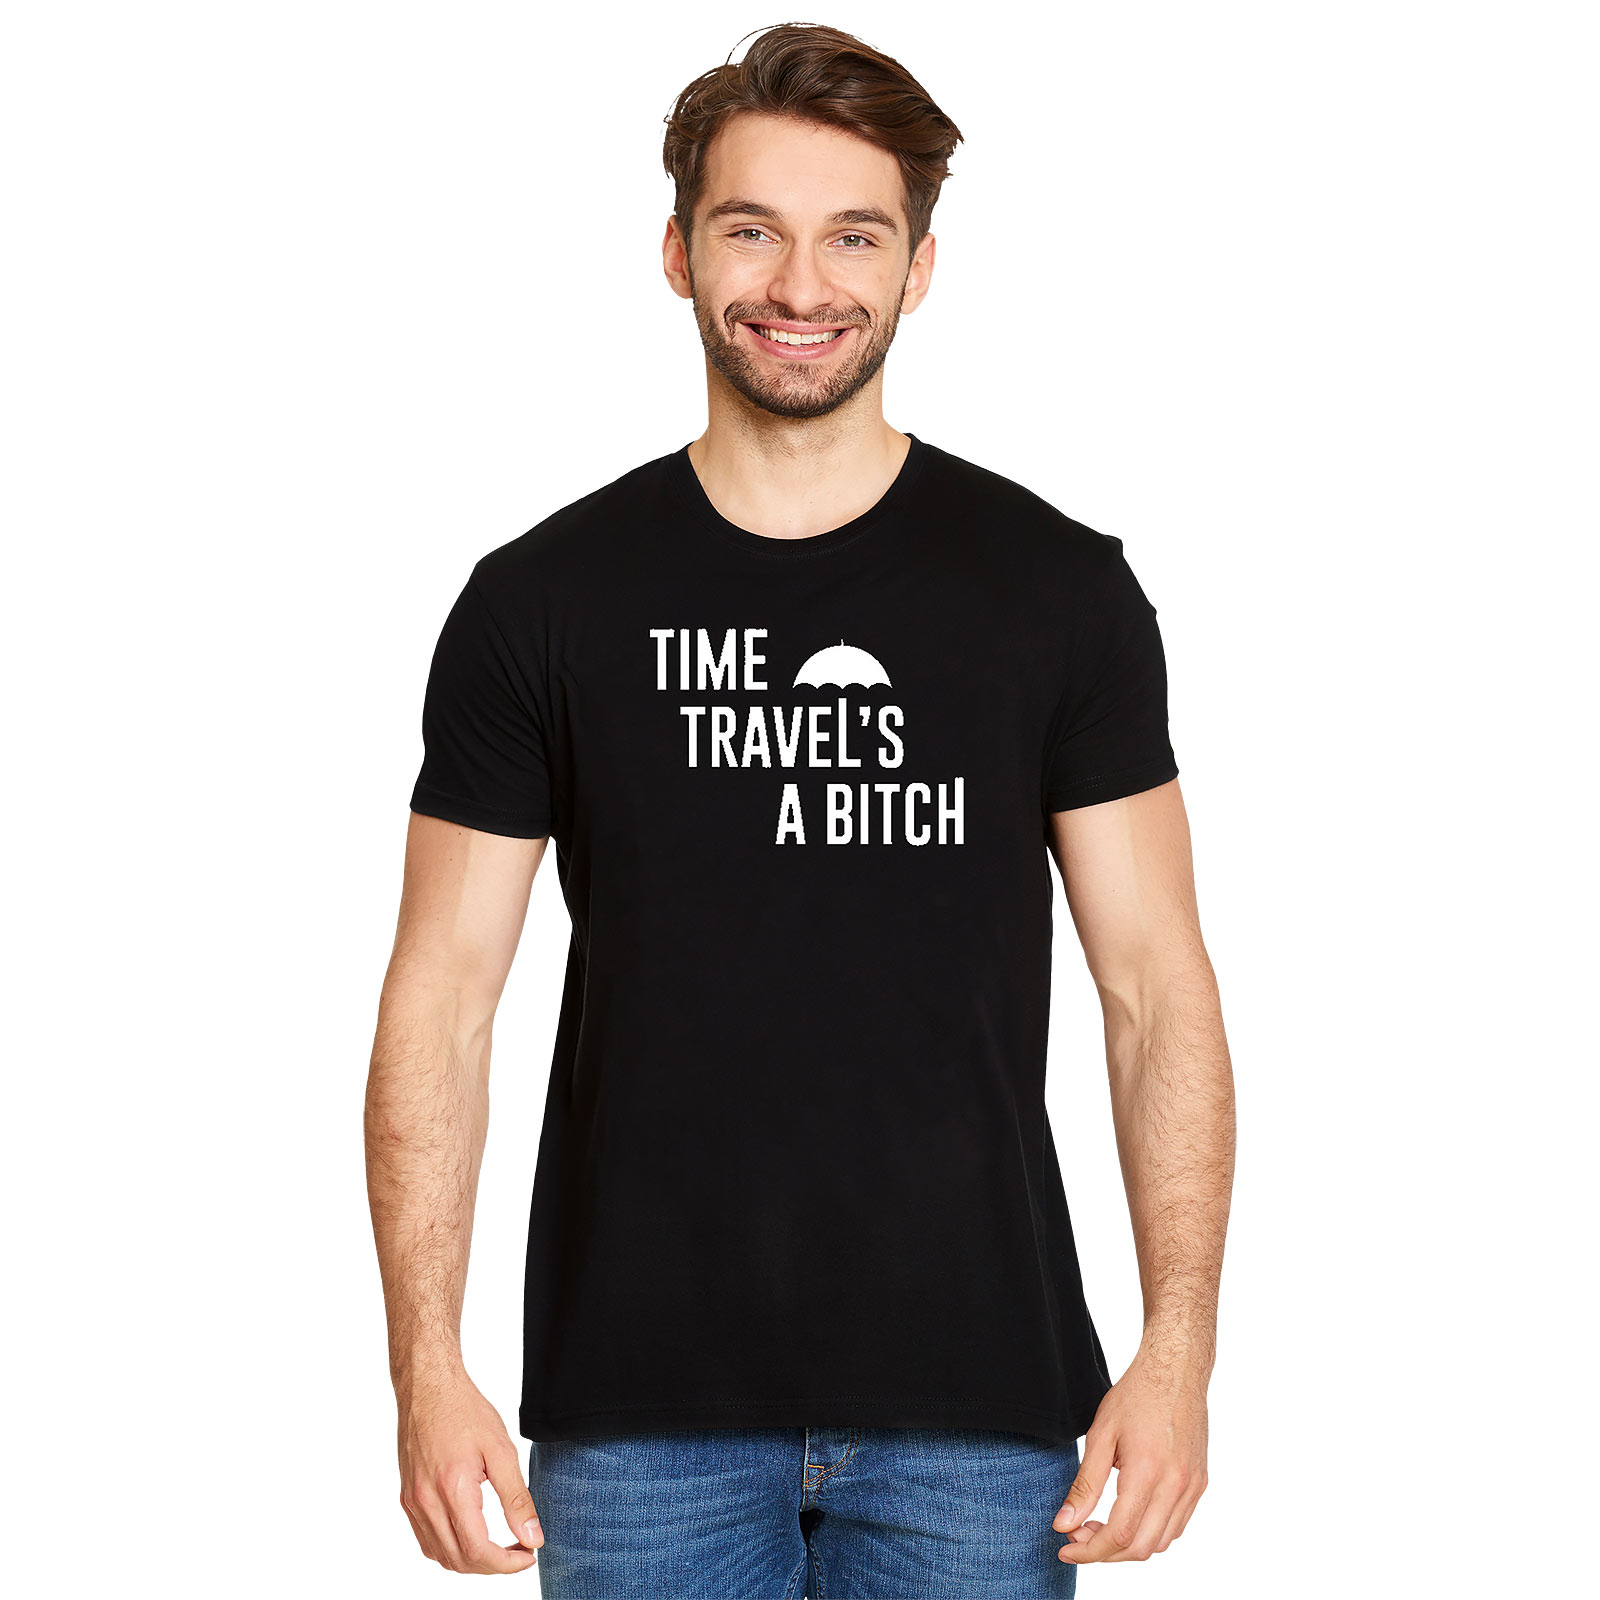 Time Travel's a Bitch T-Shirt for The Umbrella Academy Fans